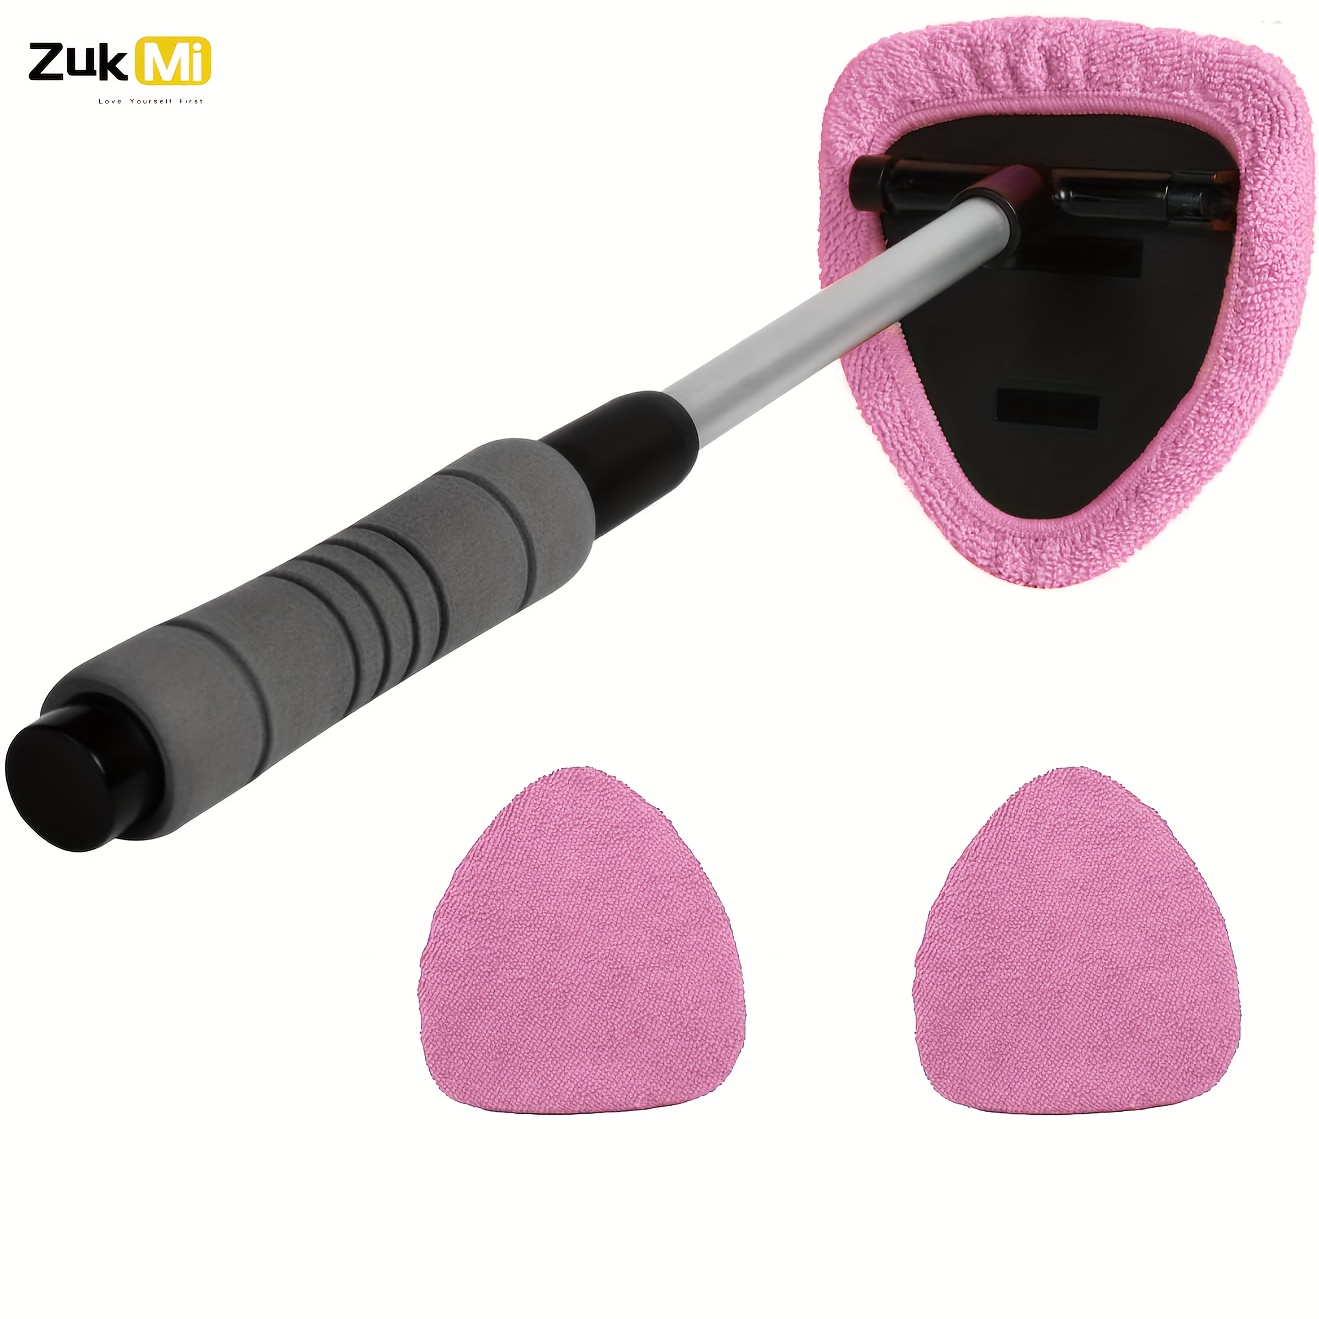 

Windshield Cleaner -microfiber Car Window Cleaning Tool With Extendable Handle Cloth Pad Head Auto Interior Exterior Glass Wiper Car Glass Cleaner Kit